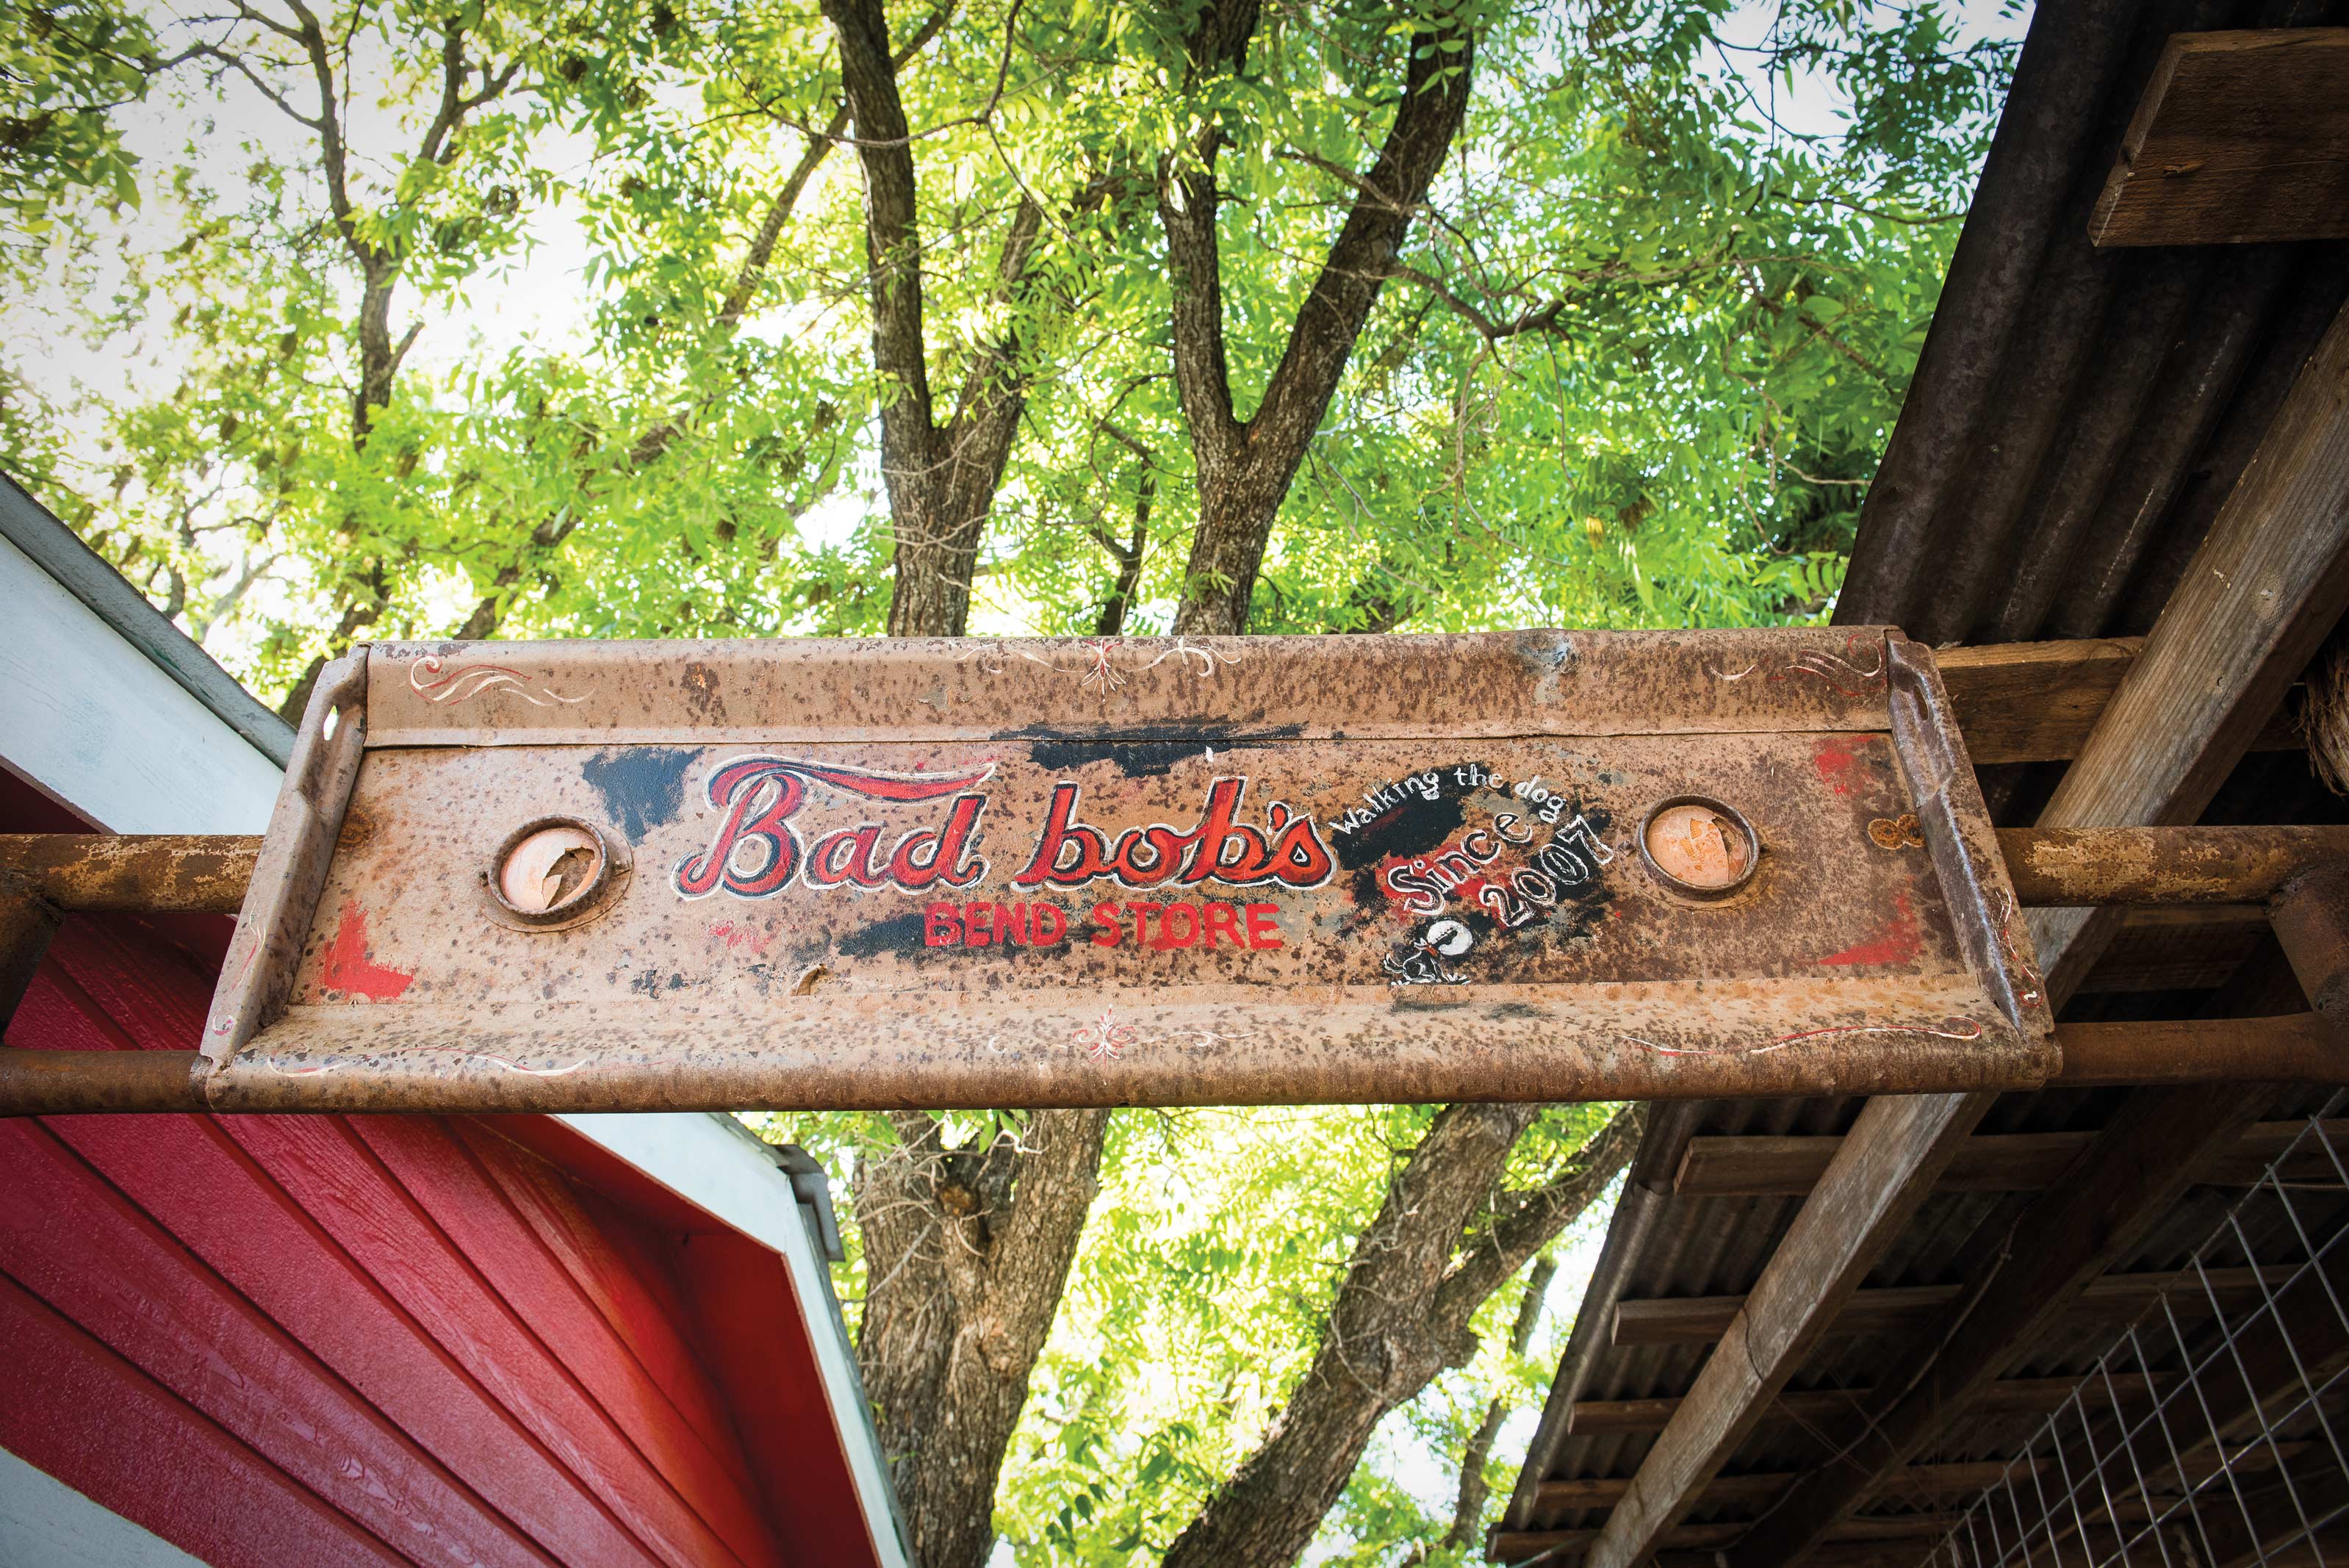 The old Bad Bob's general store sign